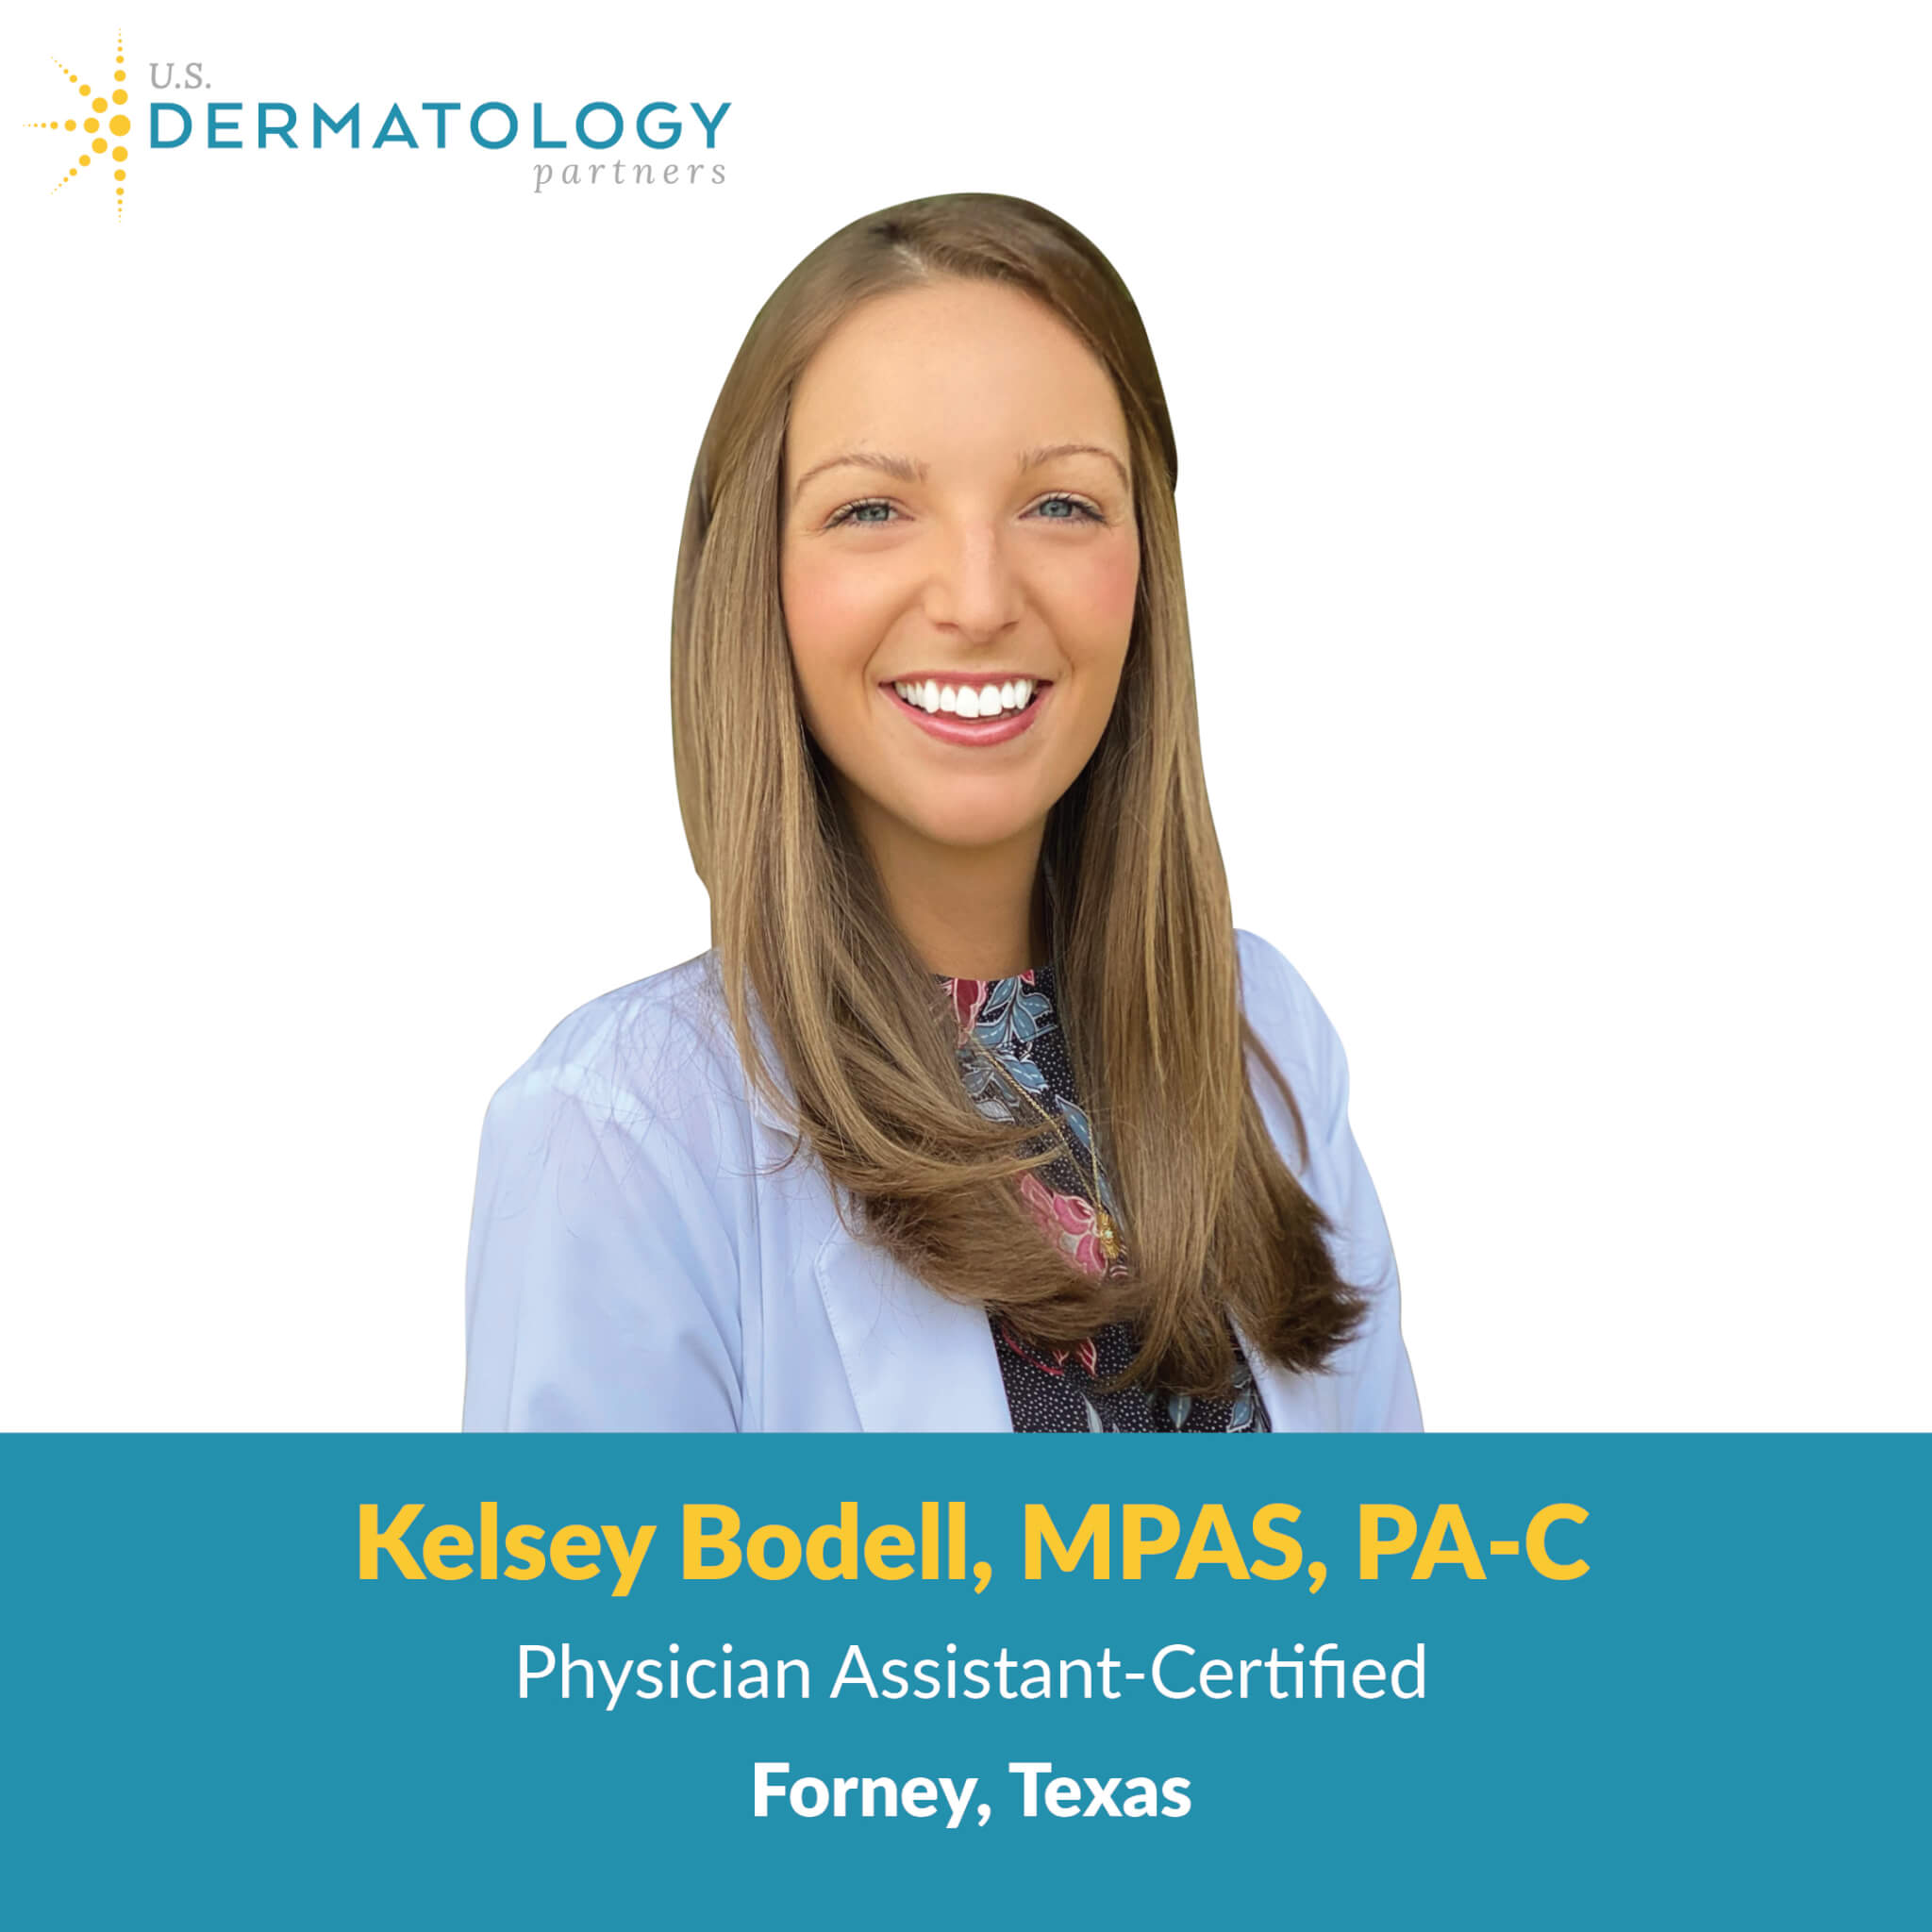 Kelsey Bodell, PA-C is a certified physician assistant at U.S. Dermatology Partners in Forney, Texas. Kelsey is accepting new patients.